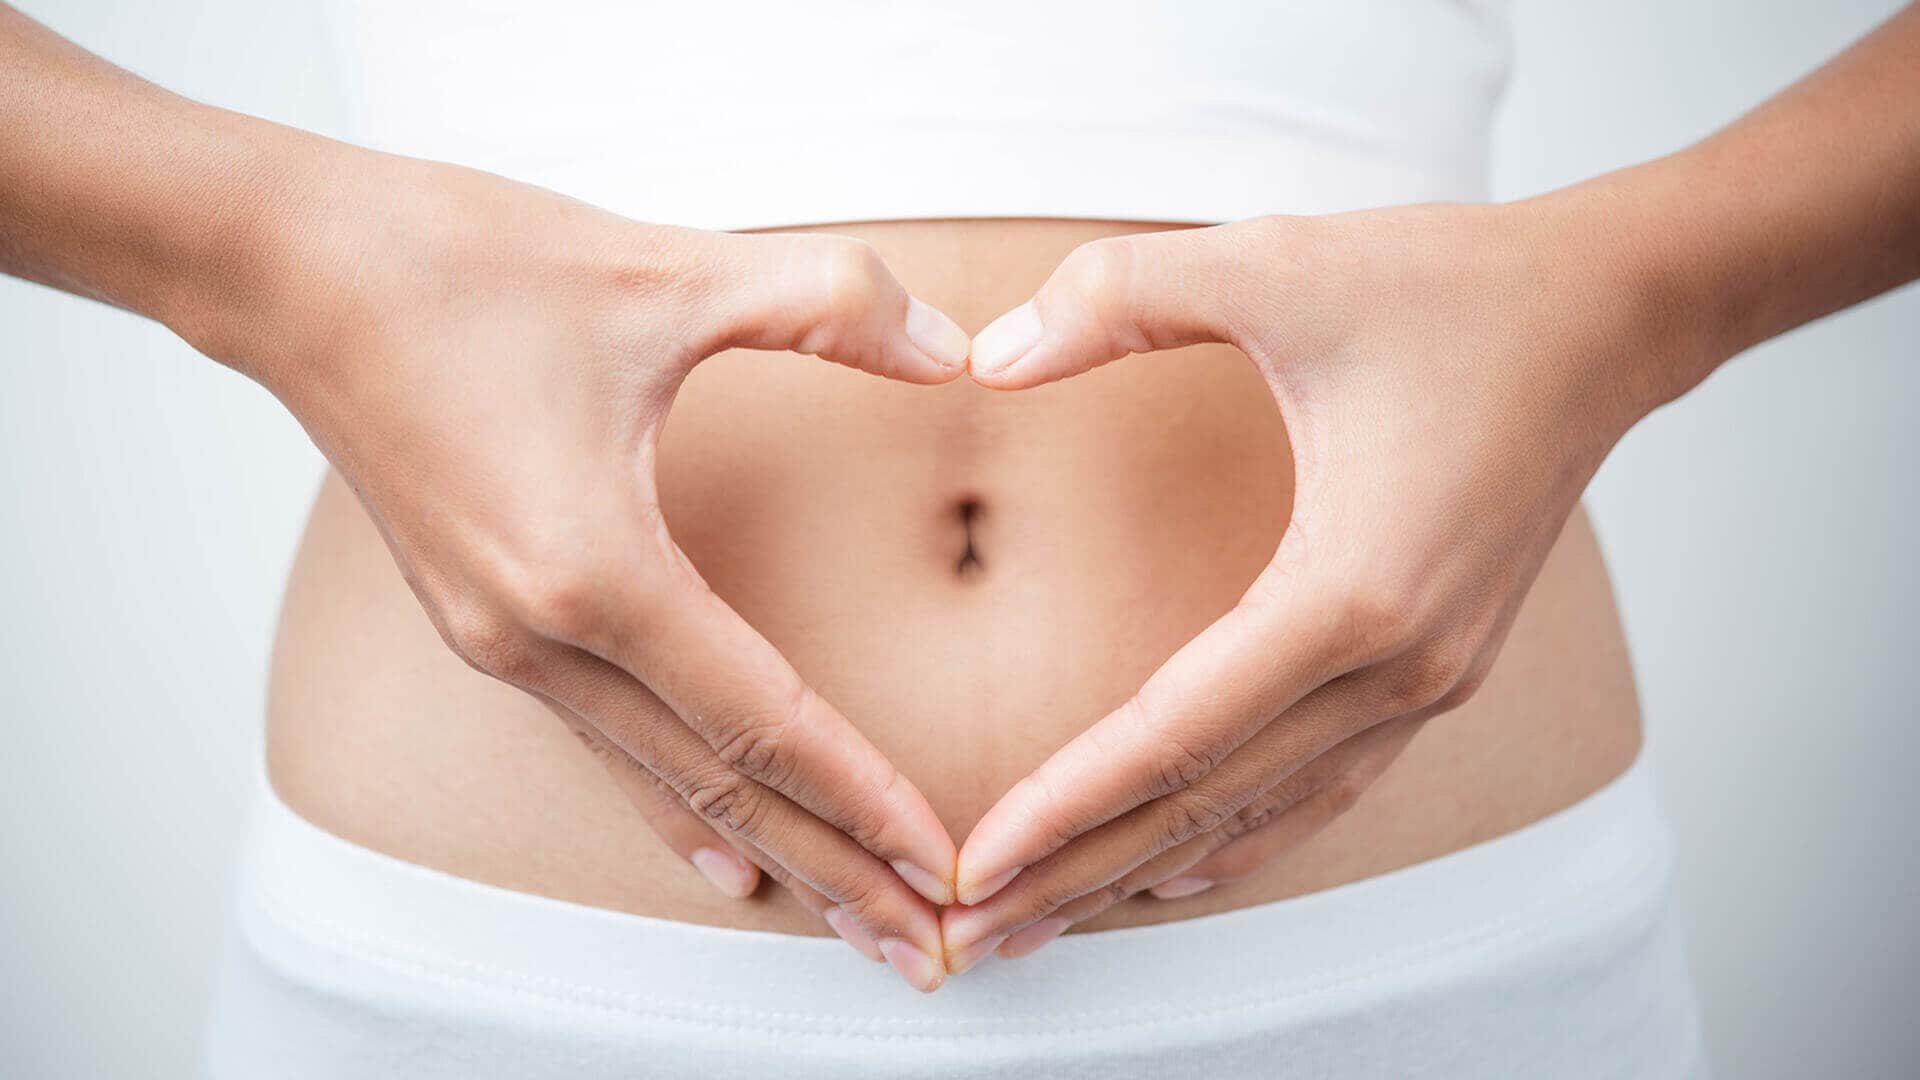 Digestive issues during pregnancy – Here is an insight about this situation